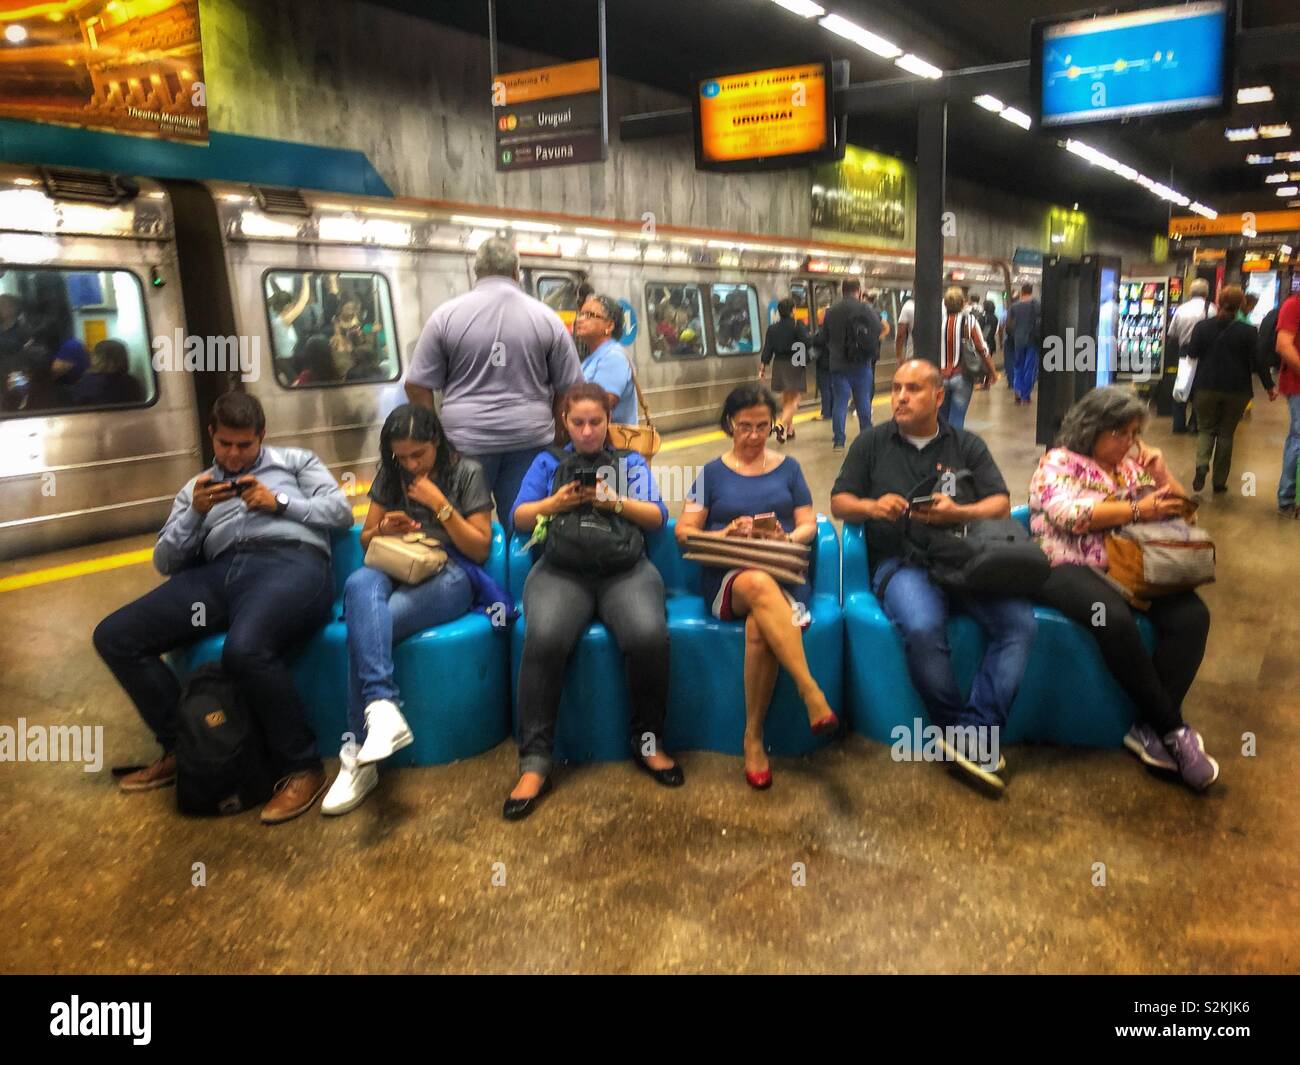 People waiting for the metro train at a station in Rio de Janeiro, Brazil. Stock Photo